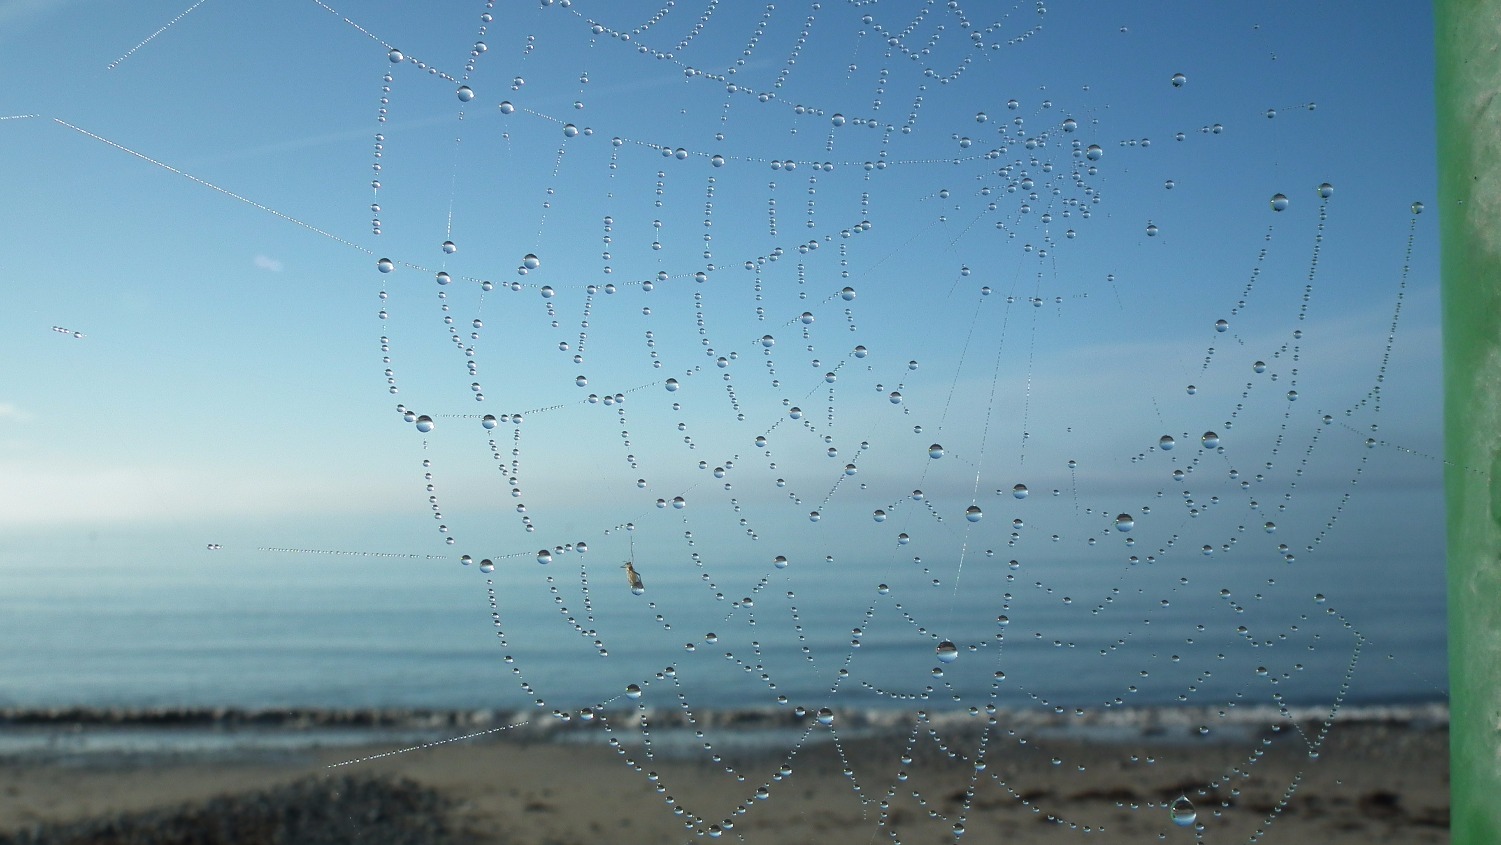 Spiders web, Spider | Web | Beach | Ocean | Sea | Sky | Blue | Cloud | Insect | Creations